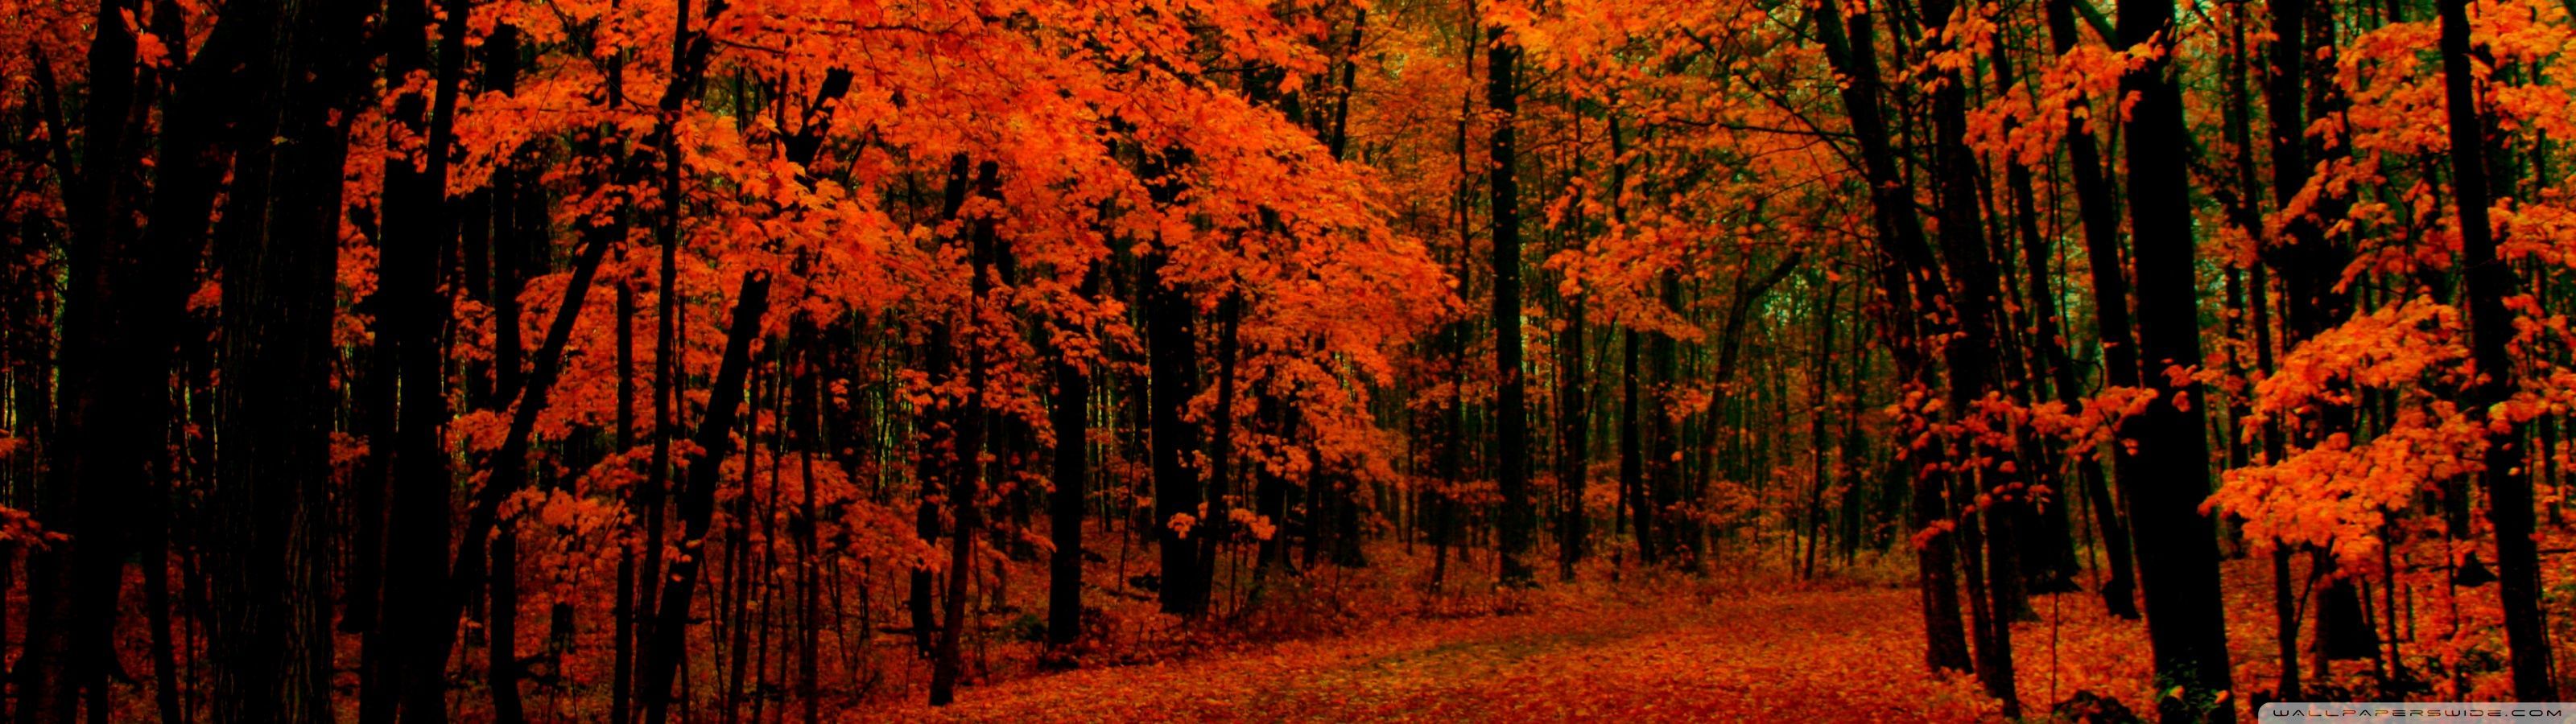 Autumn Triple Monitor Wallpapers - Wallpaper Cave